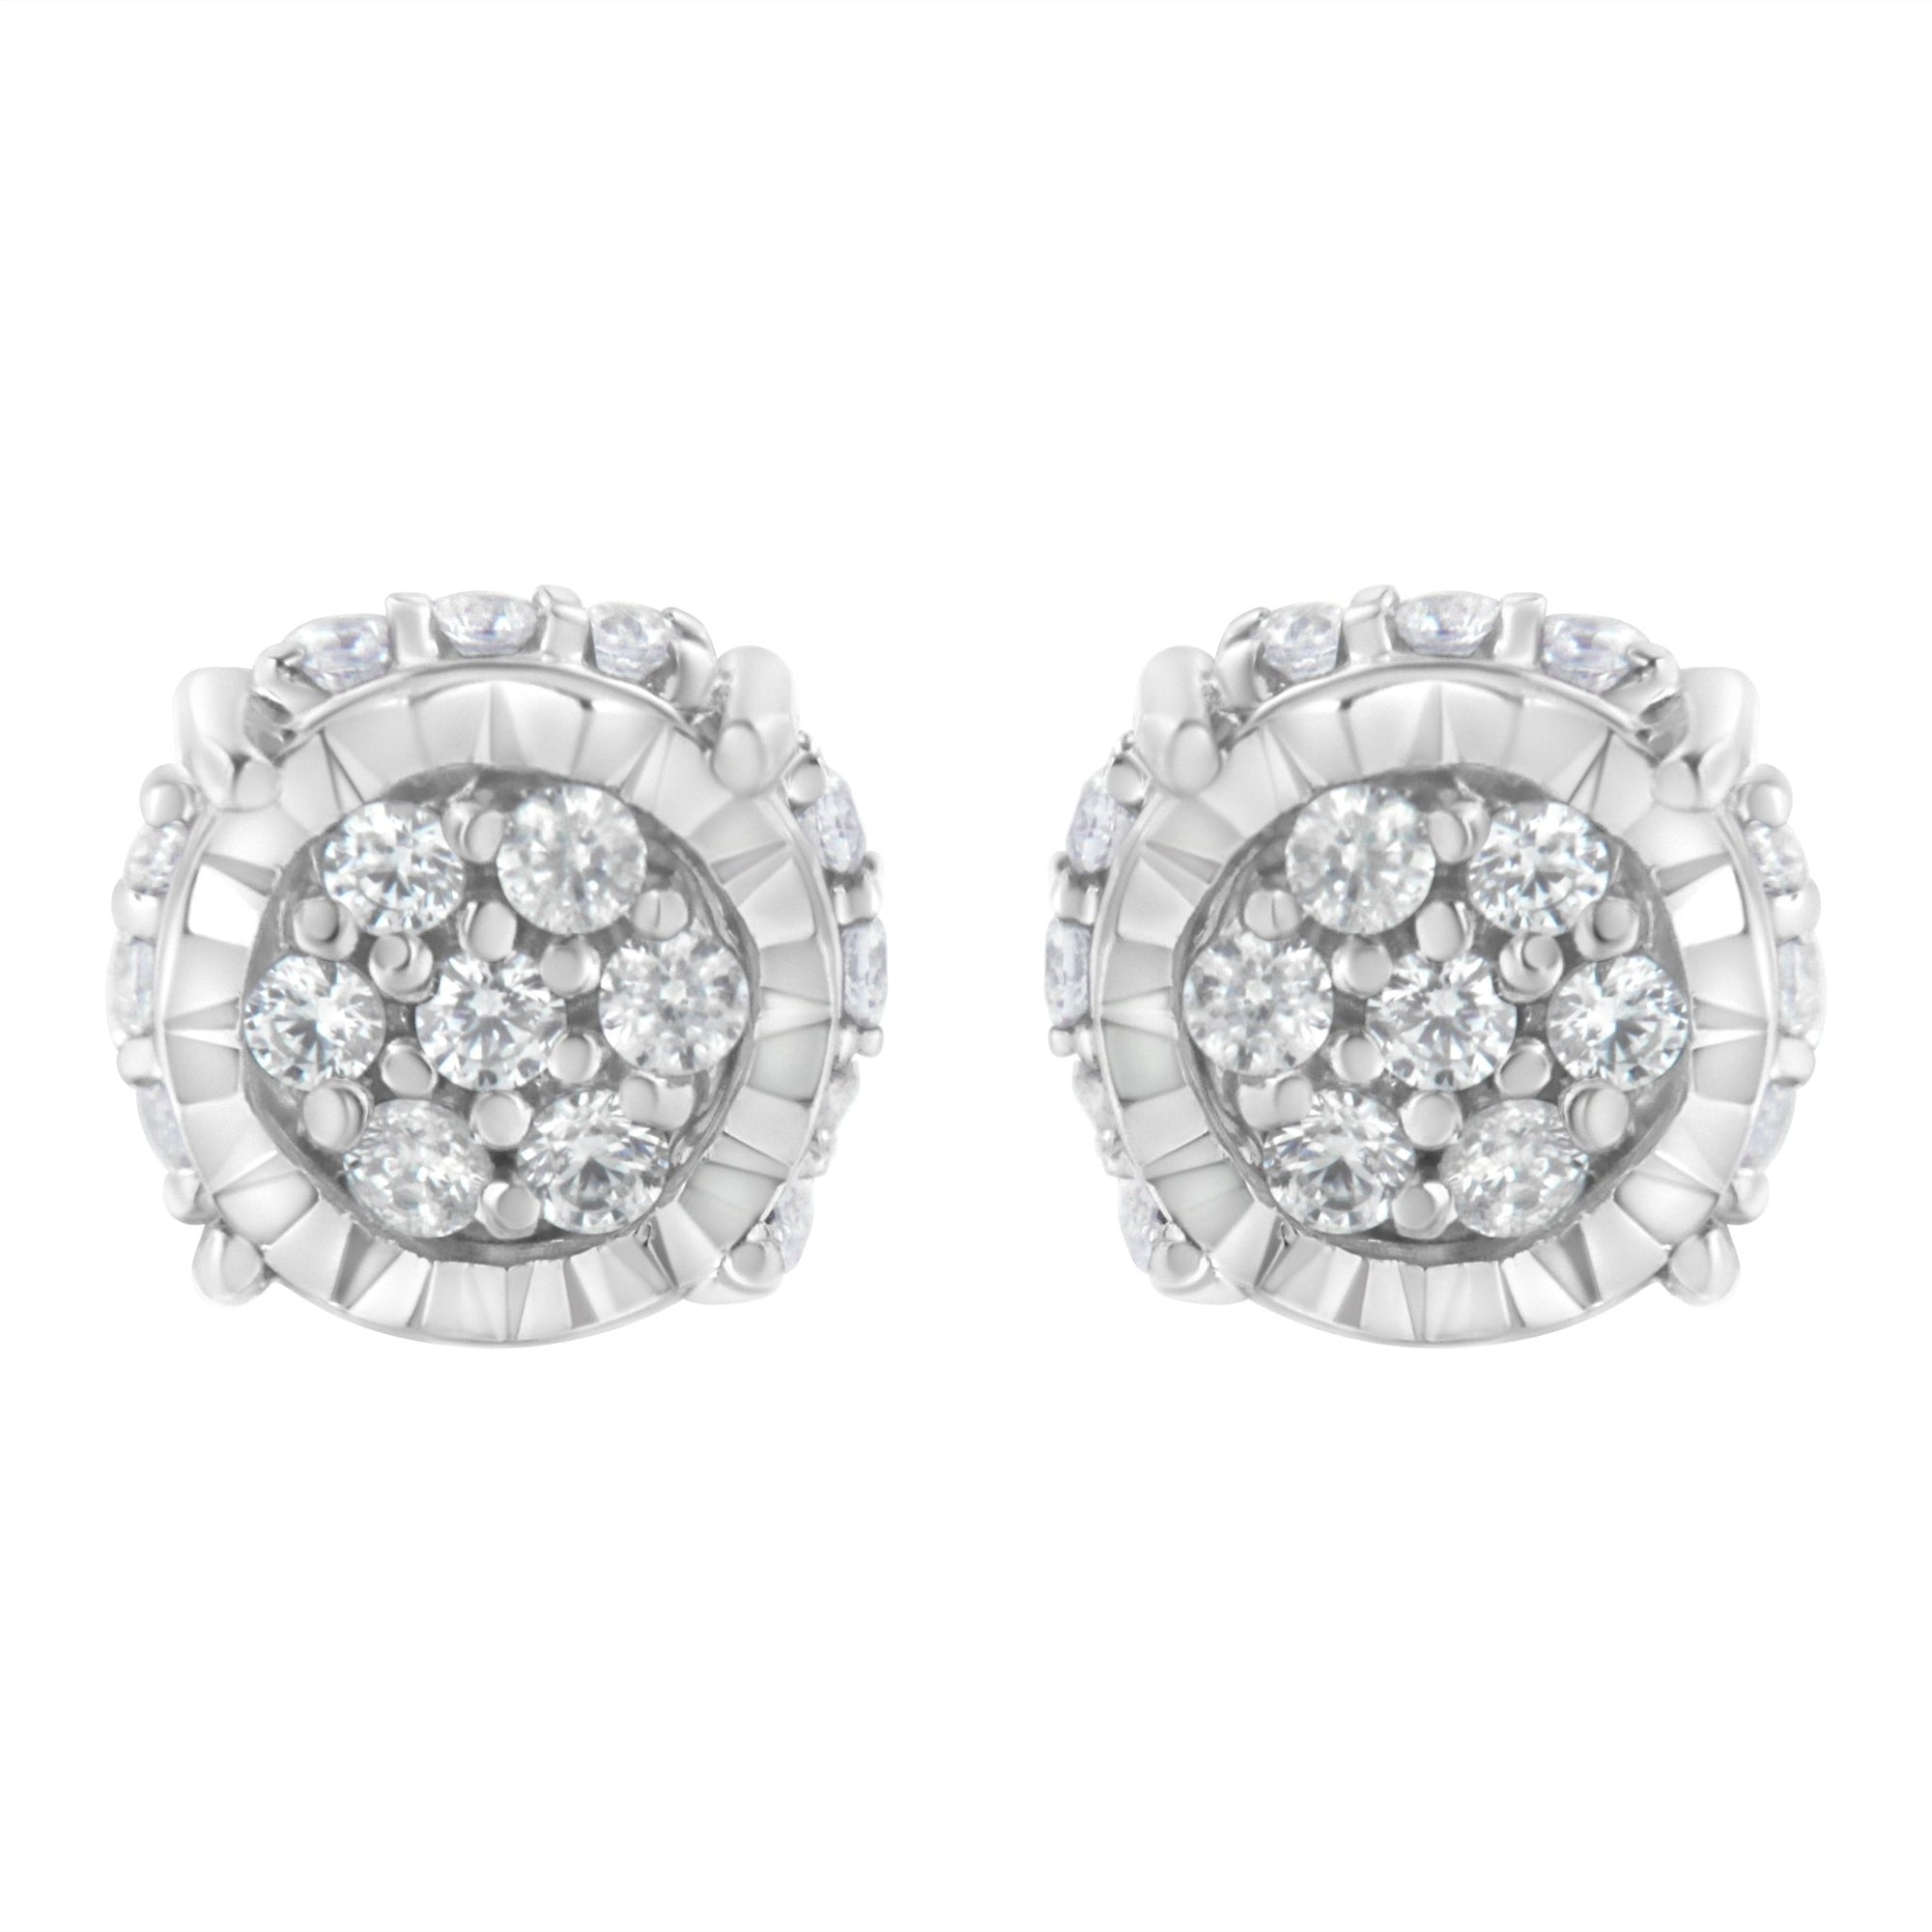 .925 Sterling Silver 1/3 cttw Round-cut Diamond Floral Stud Earring (I-J Clarity, I3 Color) - LinkagejewelrydesignLinkagejewelrydesign